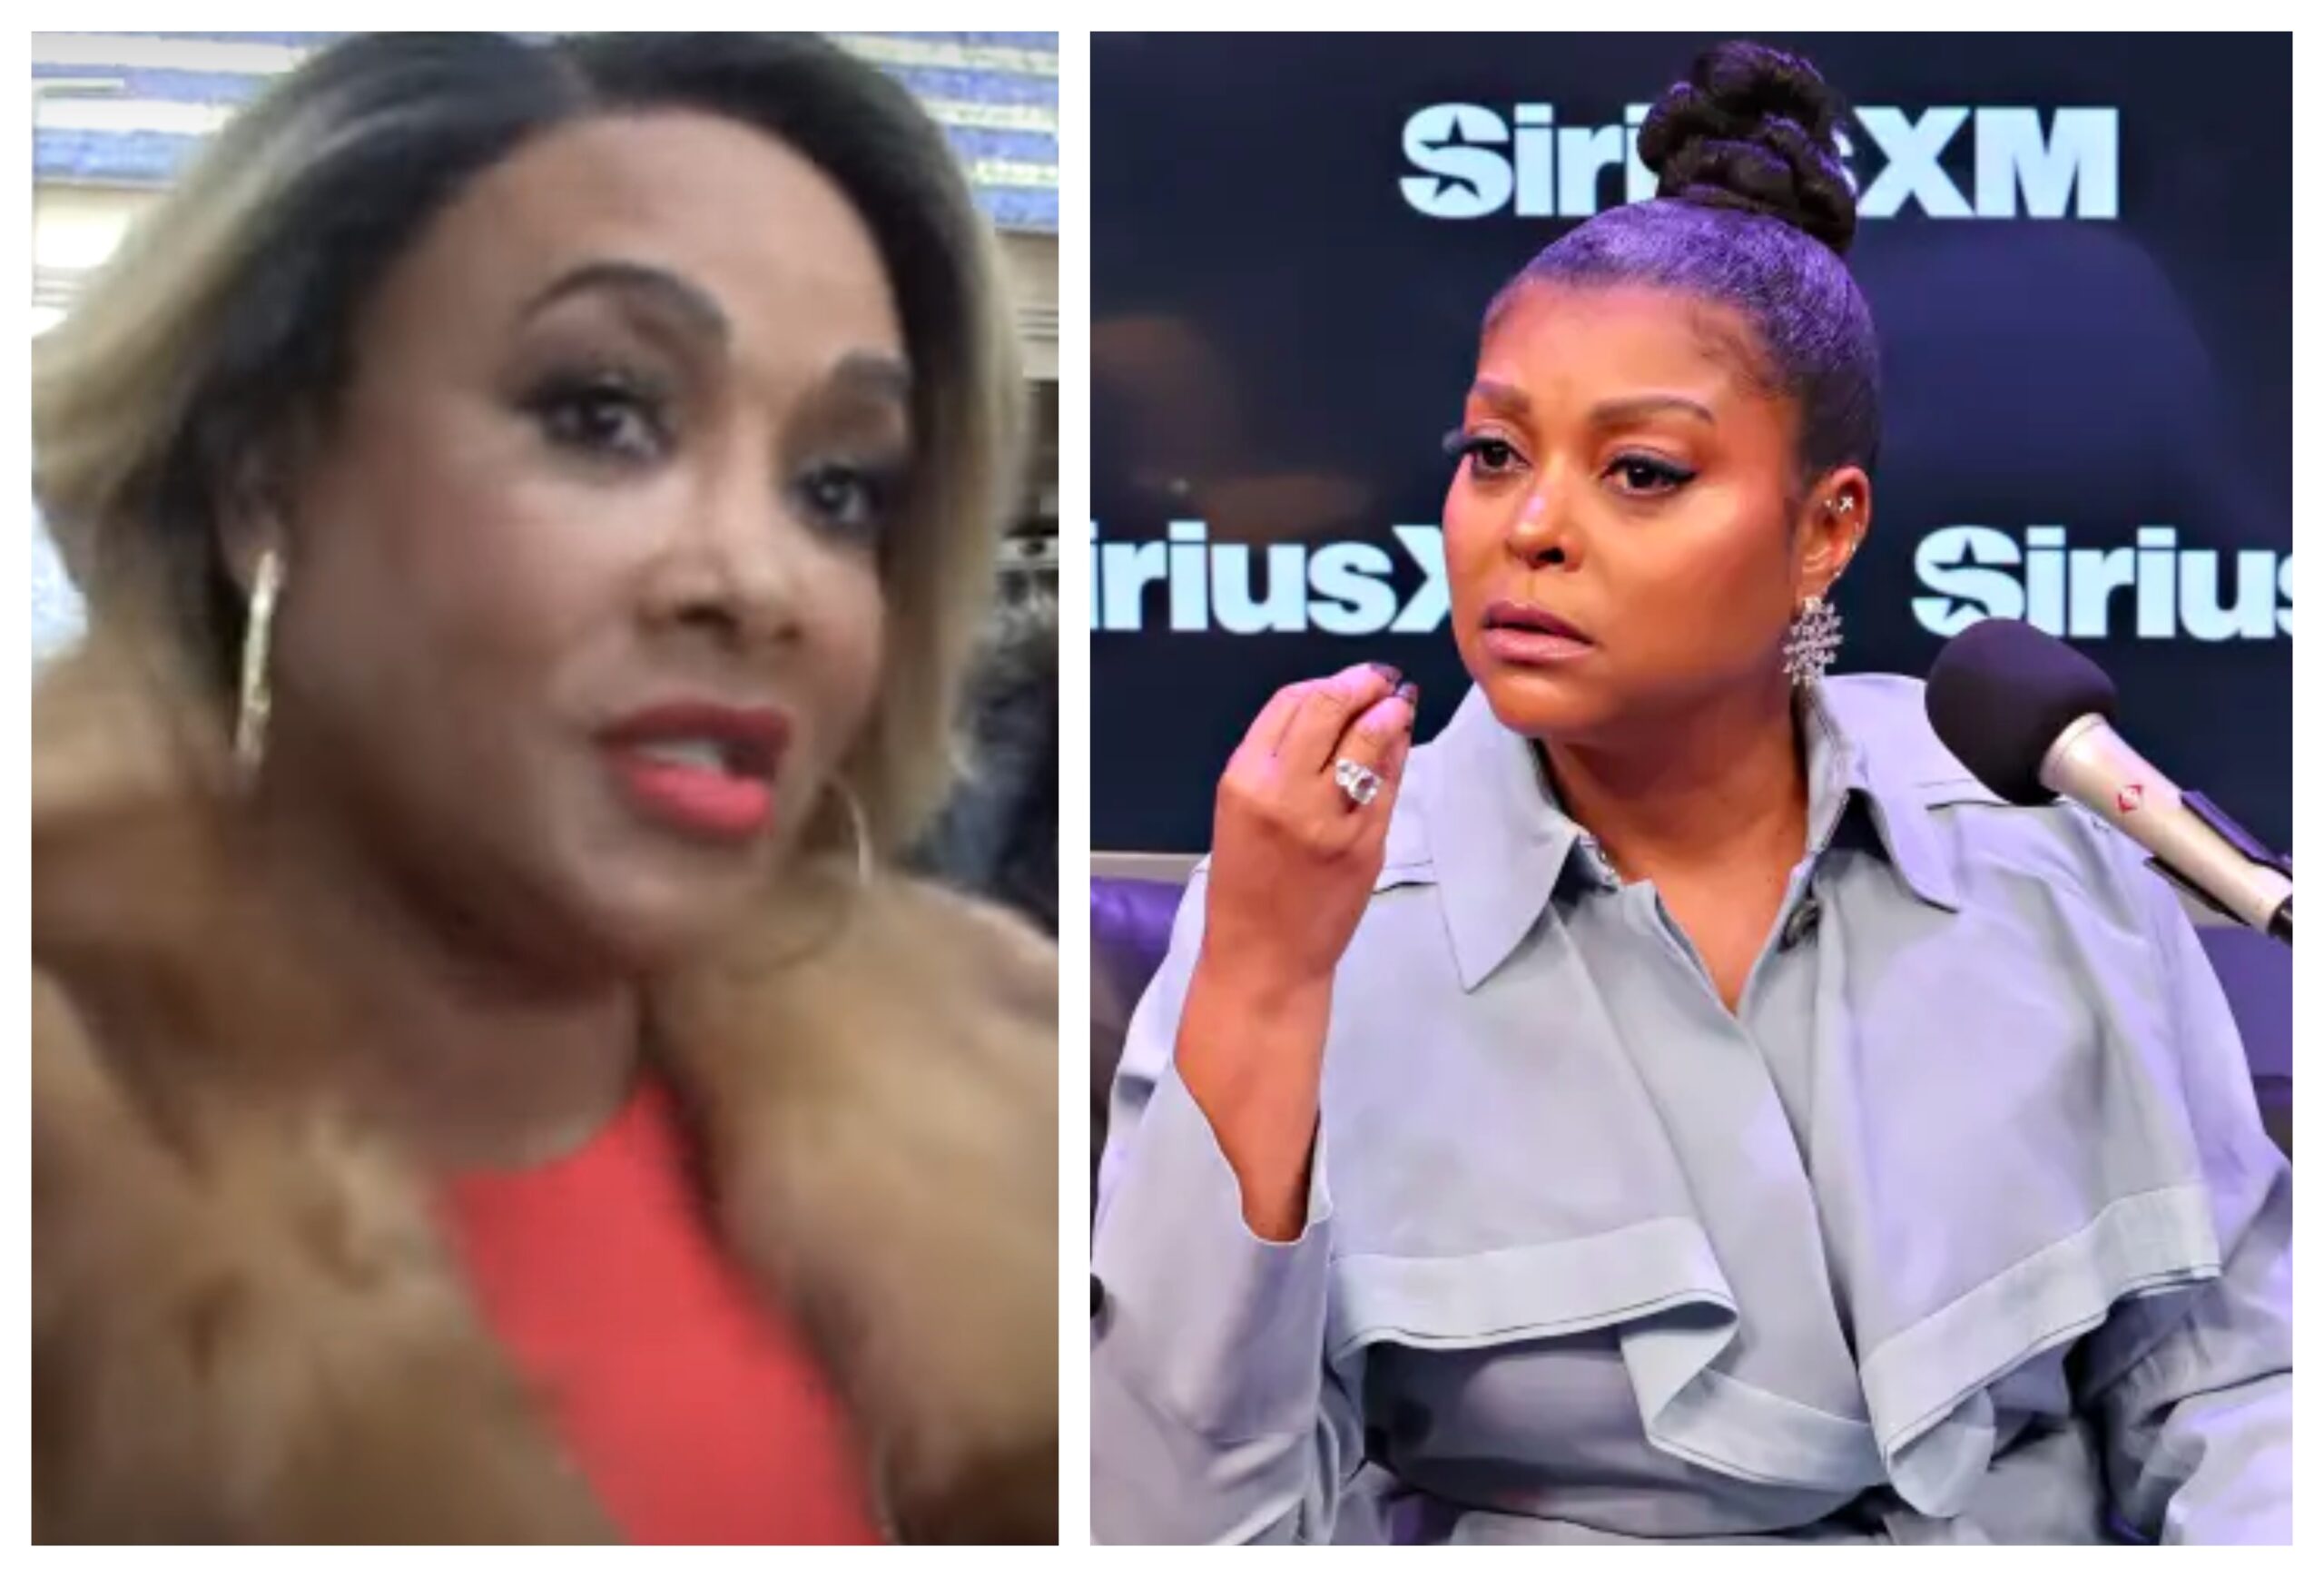 Vivica A. Fox on Taraji P. Henson’s Pay Inequality Claims: “I Didn’t Have That Experience”